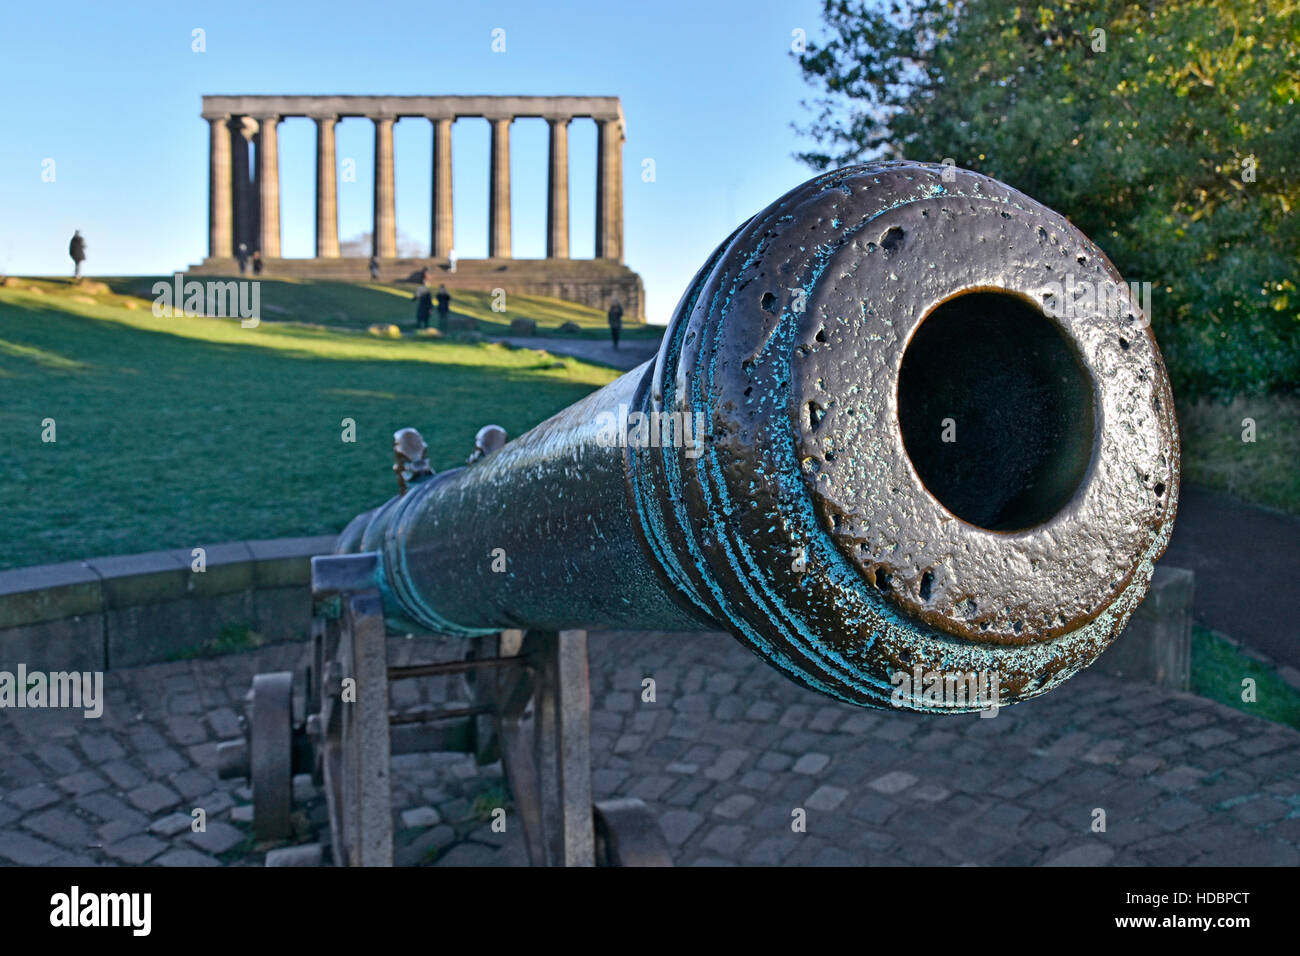 Barrel of cannon captured in a Burma war unfinished Scottish National Monument of Scotland beyond all located on the top of Carlton Hill Edinburgh uk Stock Photo